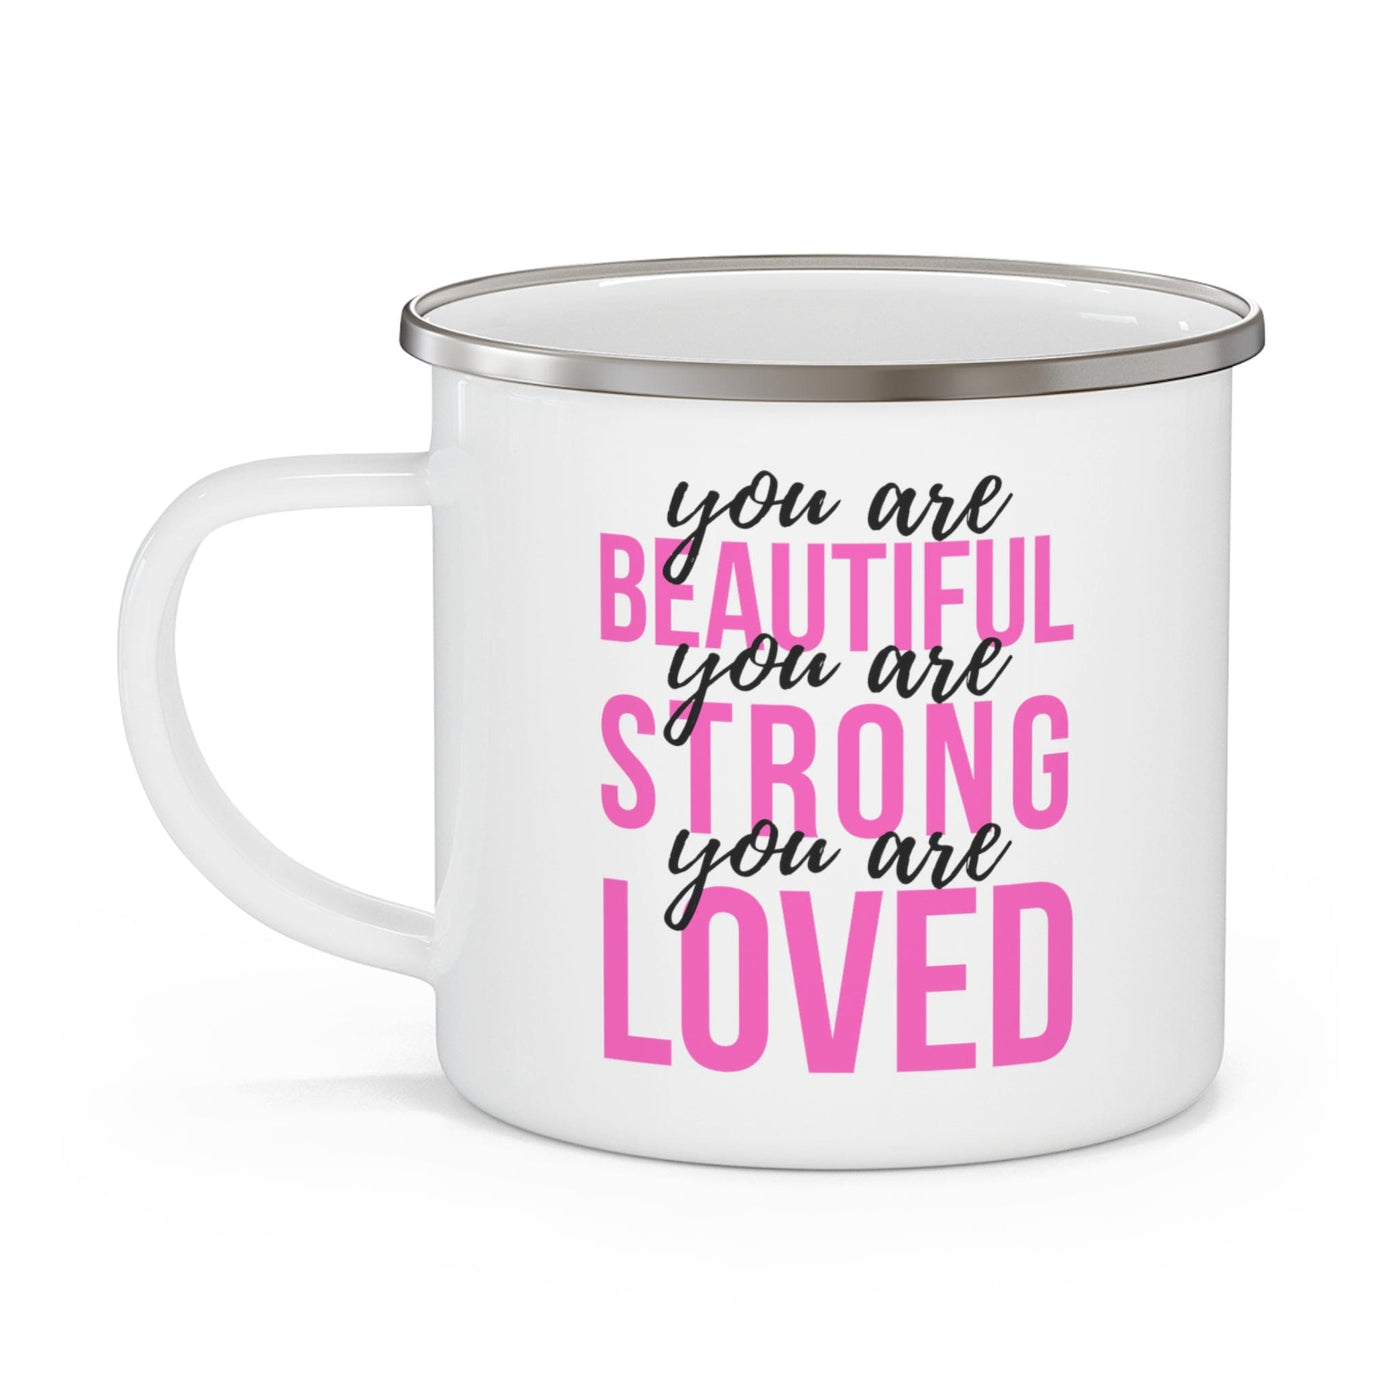 Enamel Camping Mug You Are Beautiful Strong Loved Inspiration Affirmation Pink